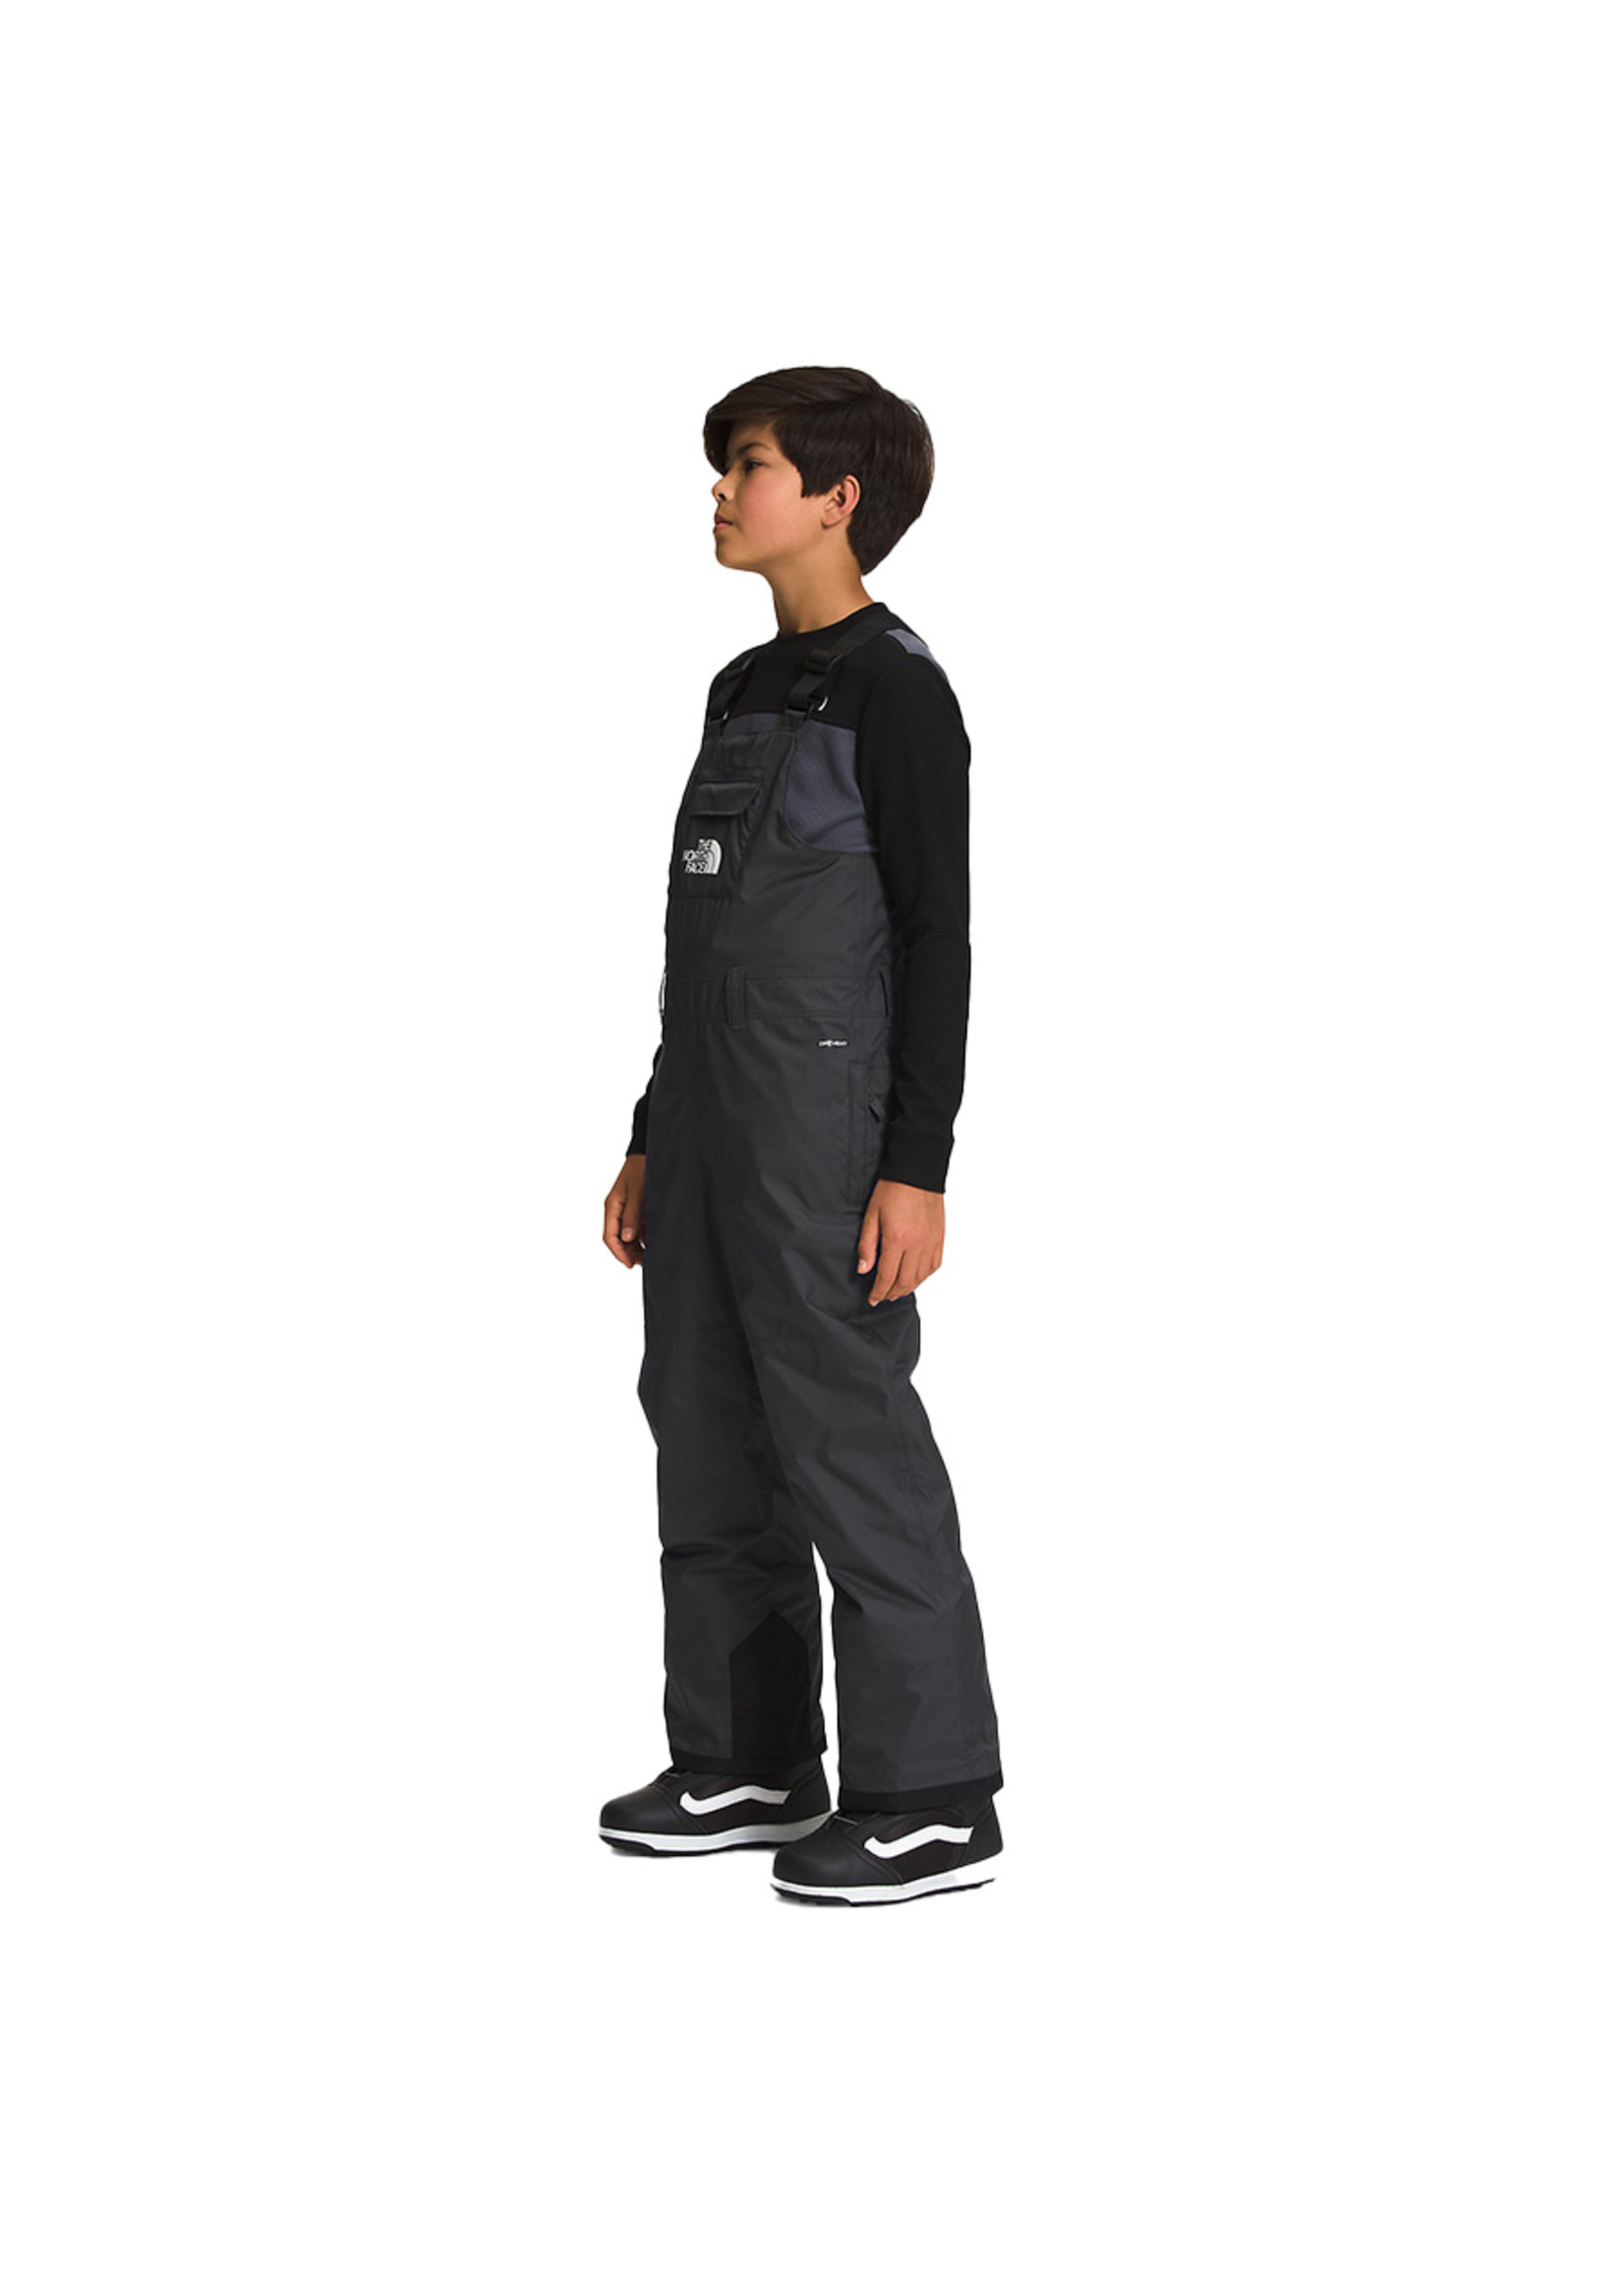 THE NORTH FACE Salopette isolée FREEDOM (Enfant)